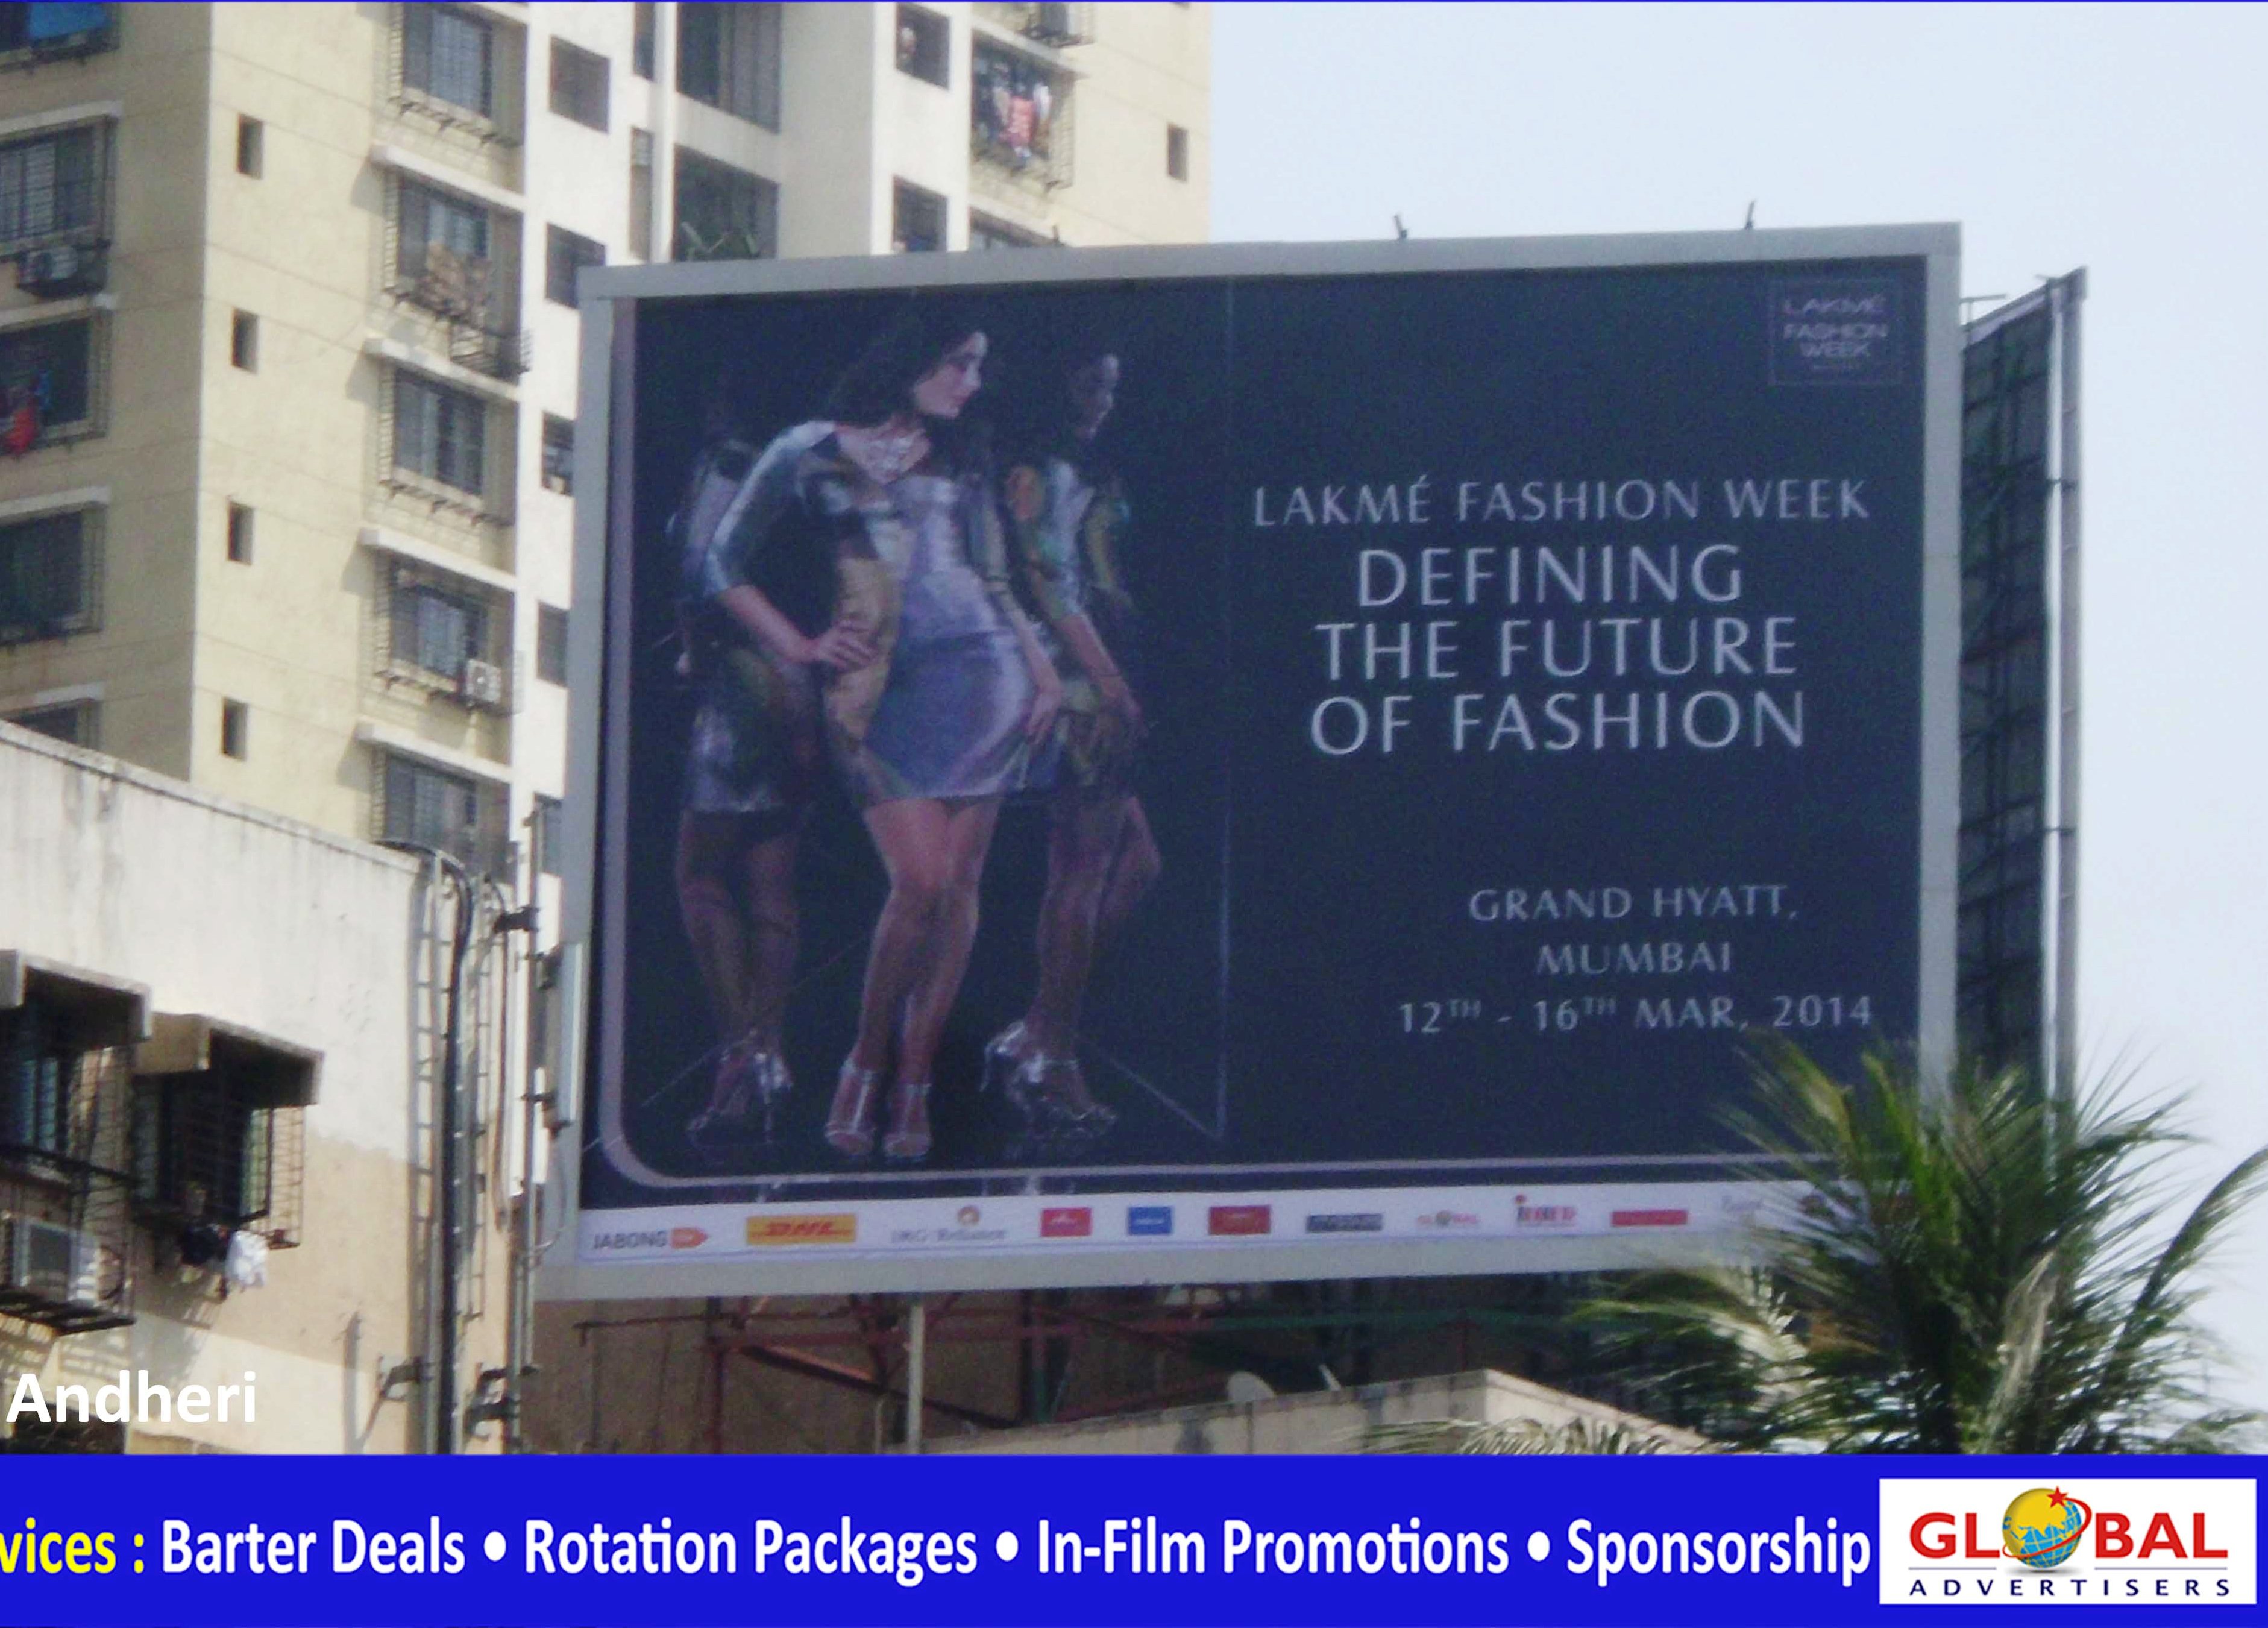 LakmÃ© Fashion Week once again favours Global Advertisers for outdoor promotion